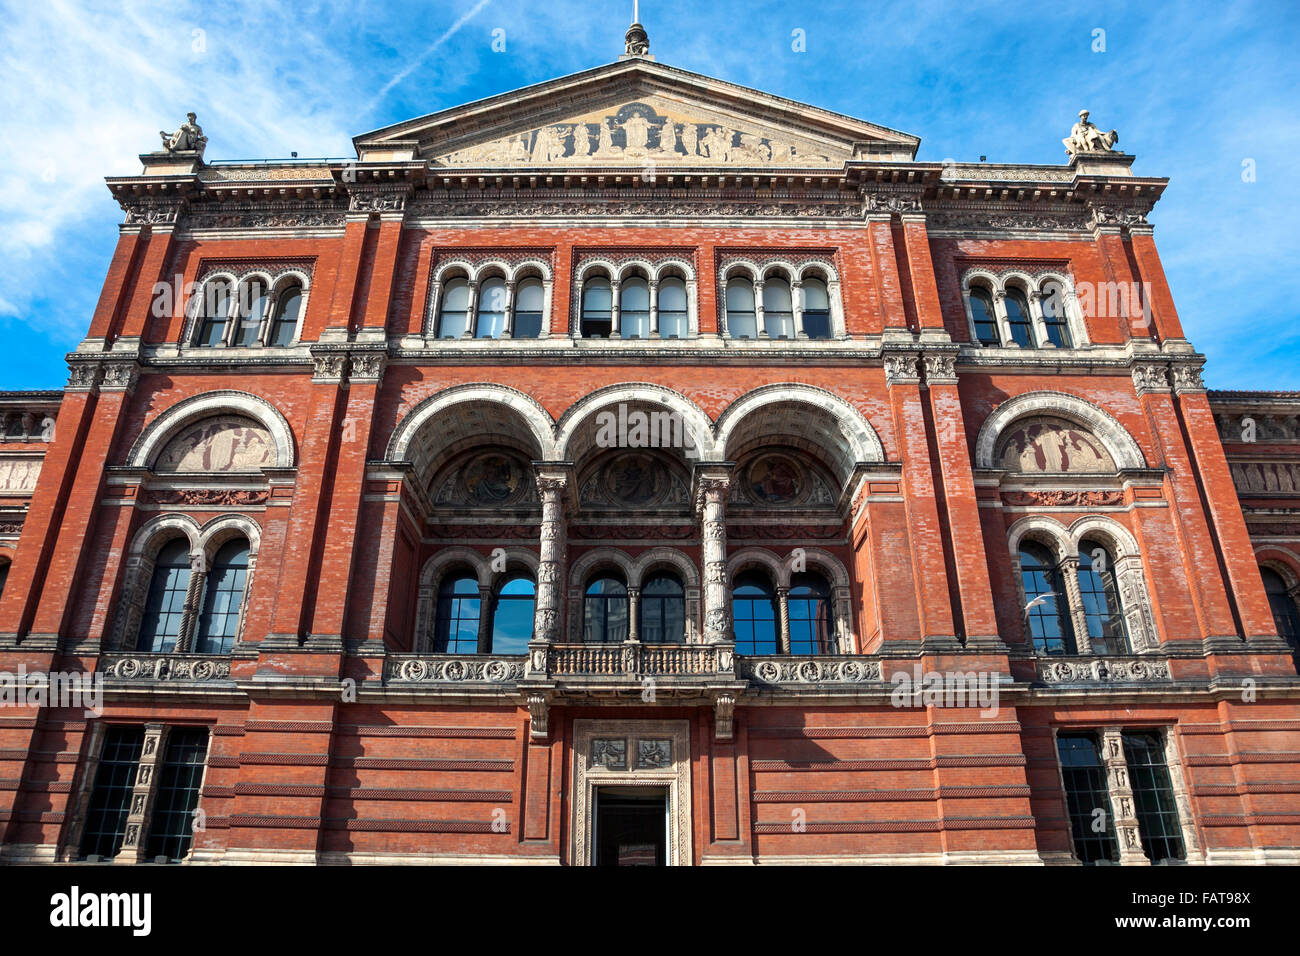 View of the Victoria and Albert Museum from the courtyard, London, UK Stock Photo